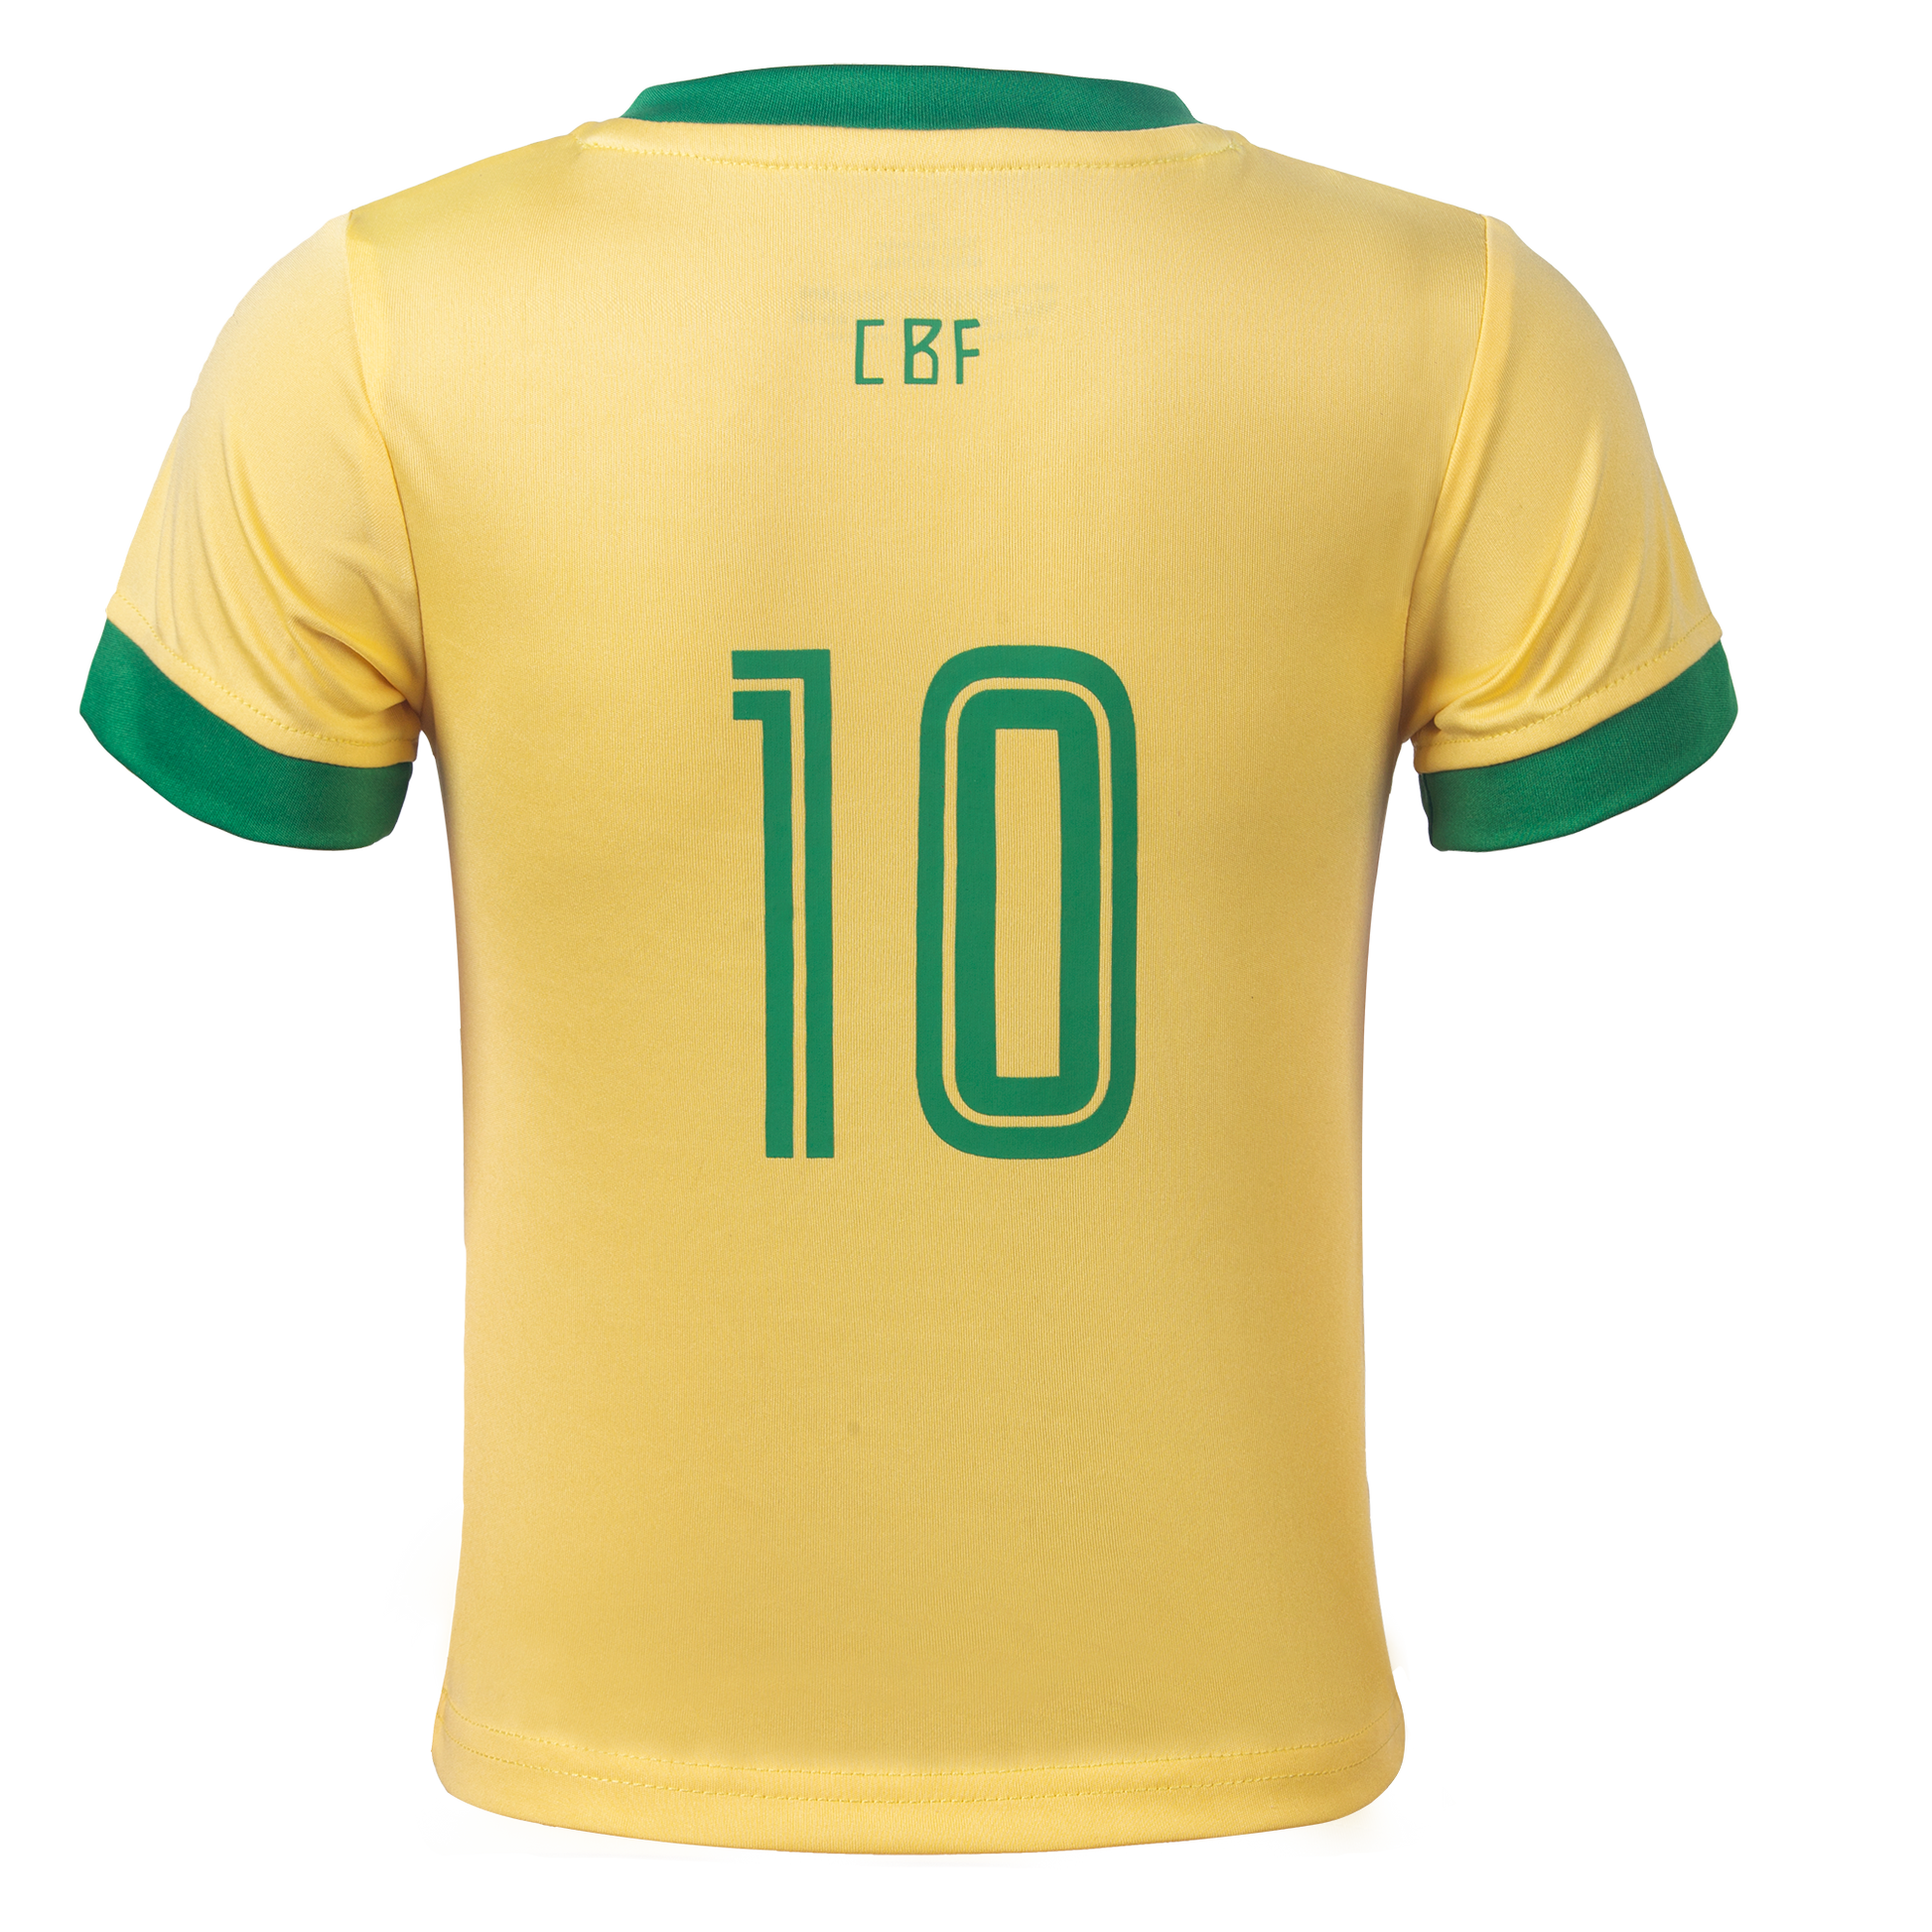 Wholesale kids brazil soccer jersey For Effortless Playing